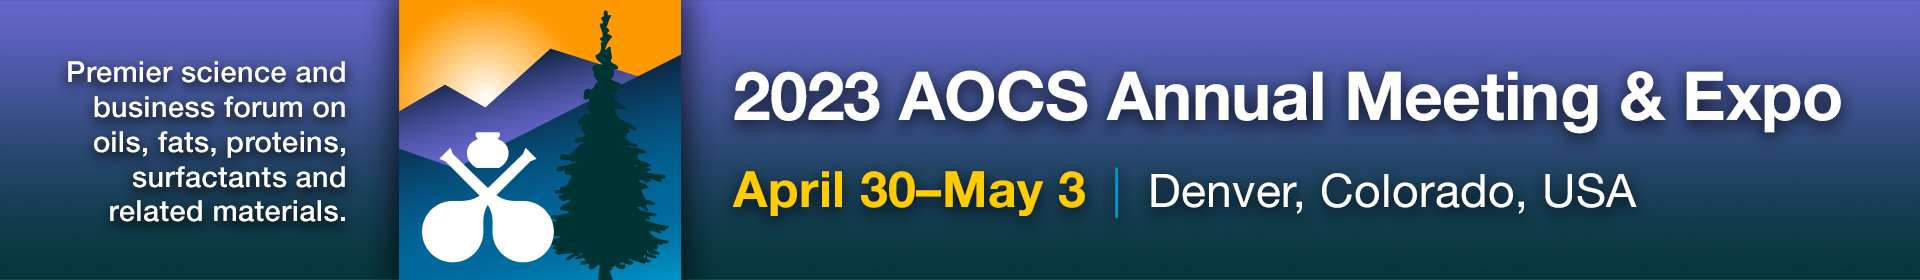 2023 AOCS Annual Meeting & Expo Banner